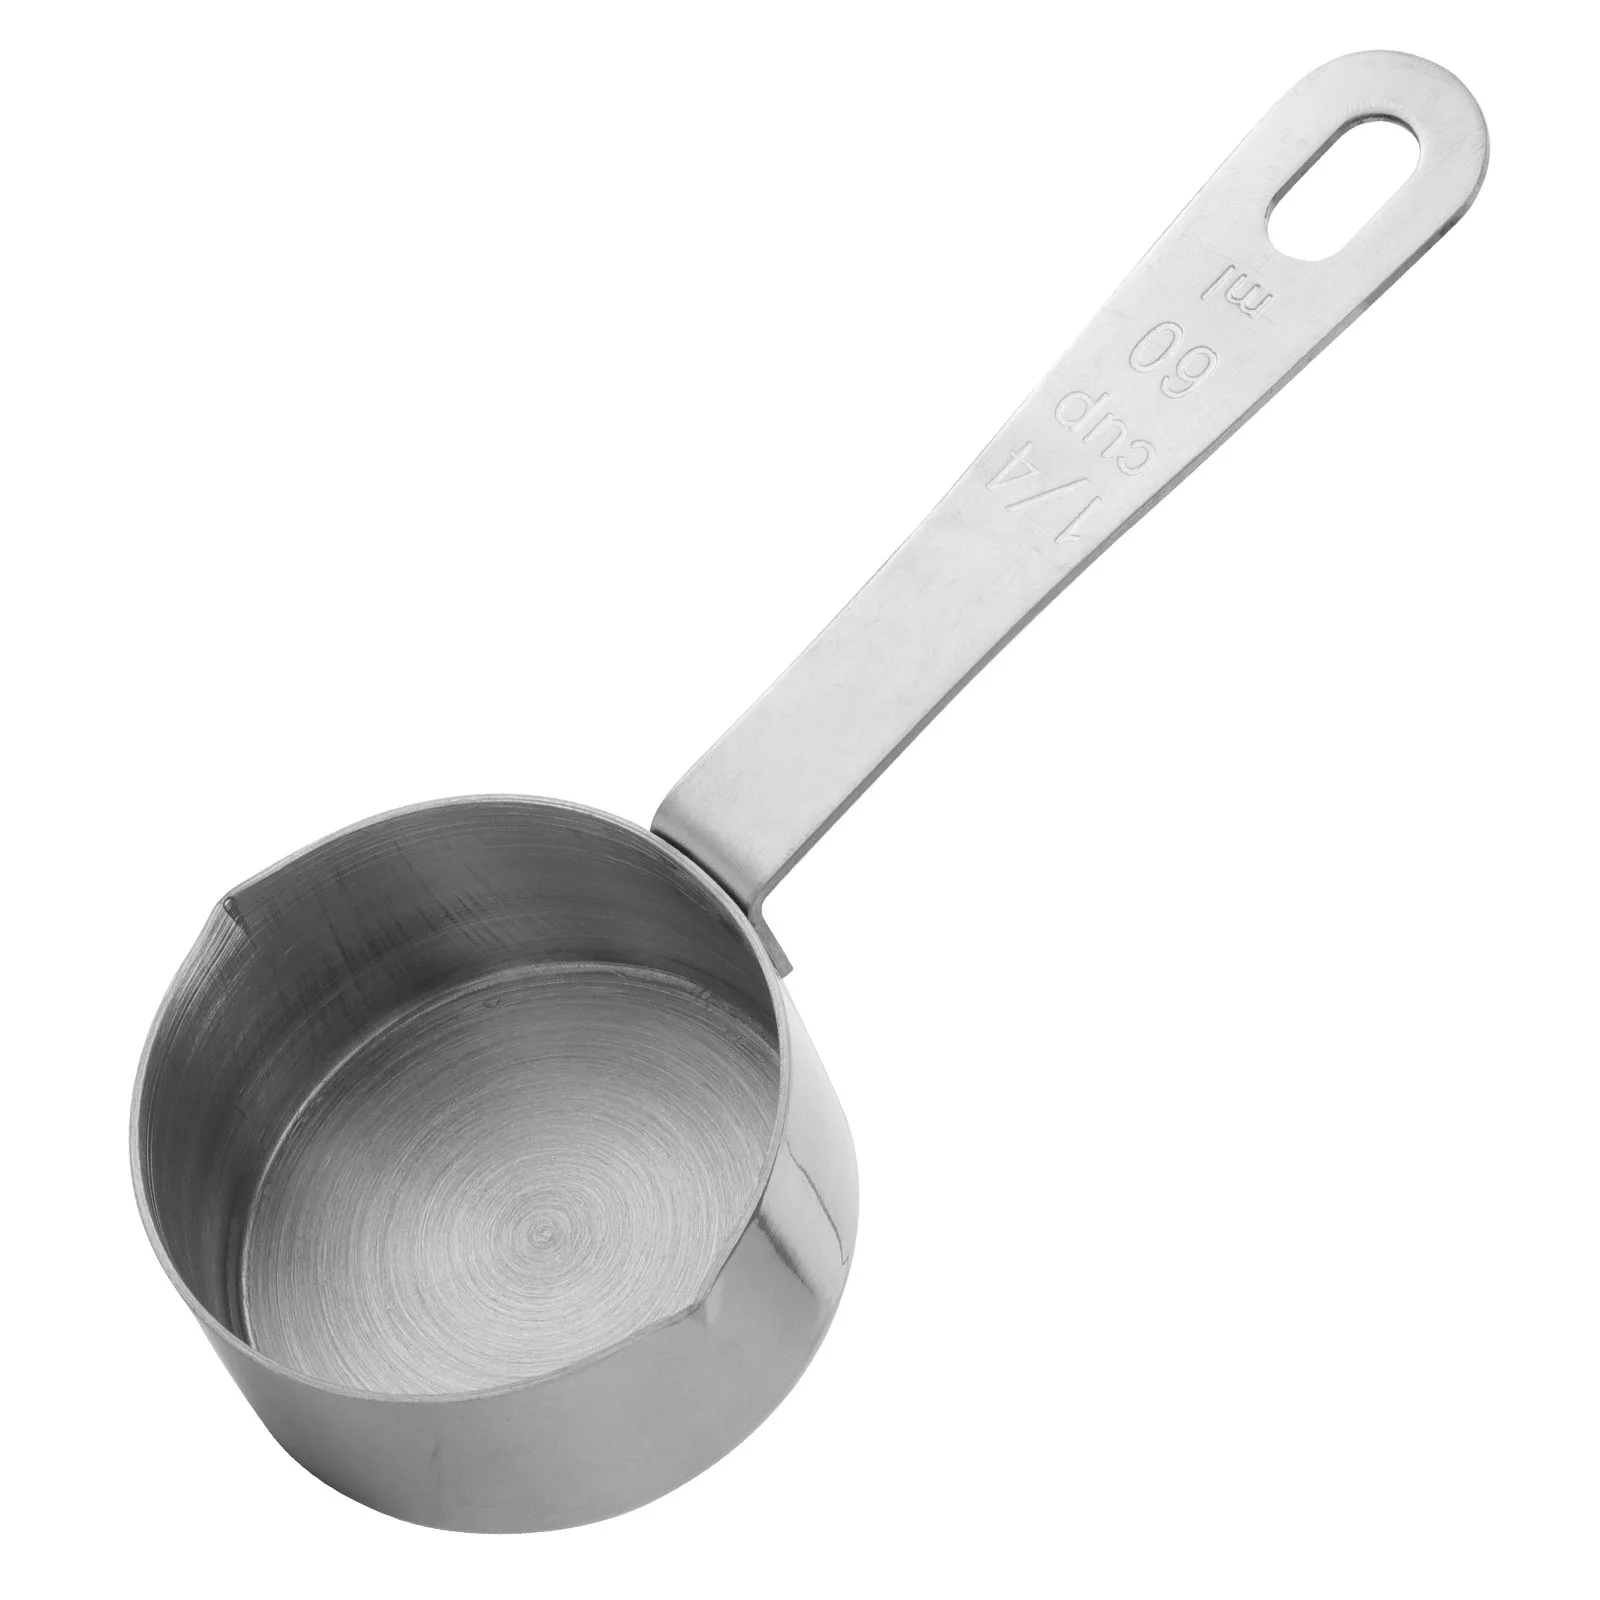 

Pot Saucepan Pan Sauce Warmer Butter Mini Steel Soup Stainless Cooking Melting Measuring Coffee Bowl Cup Chocolate Pitcher